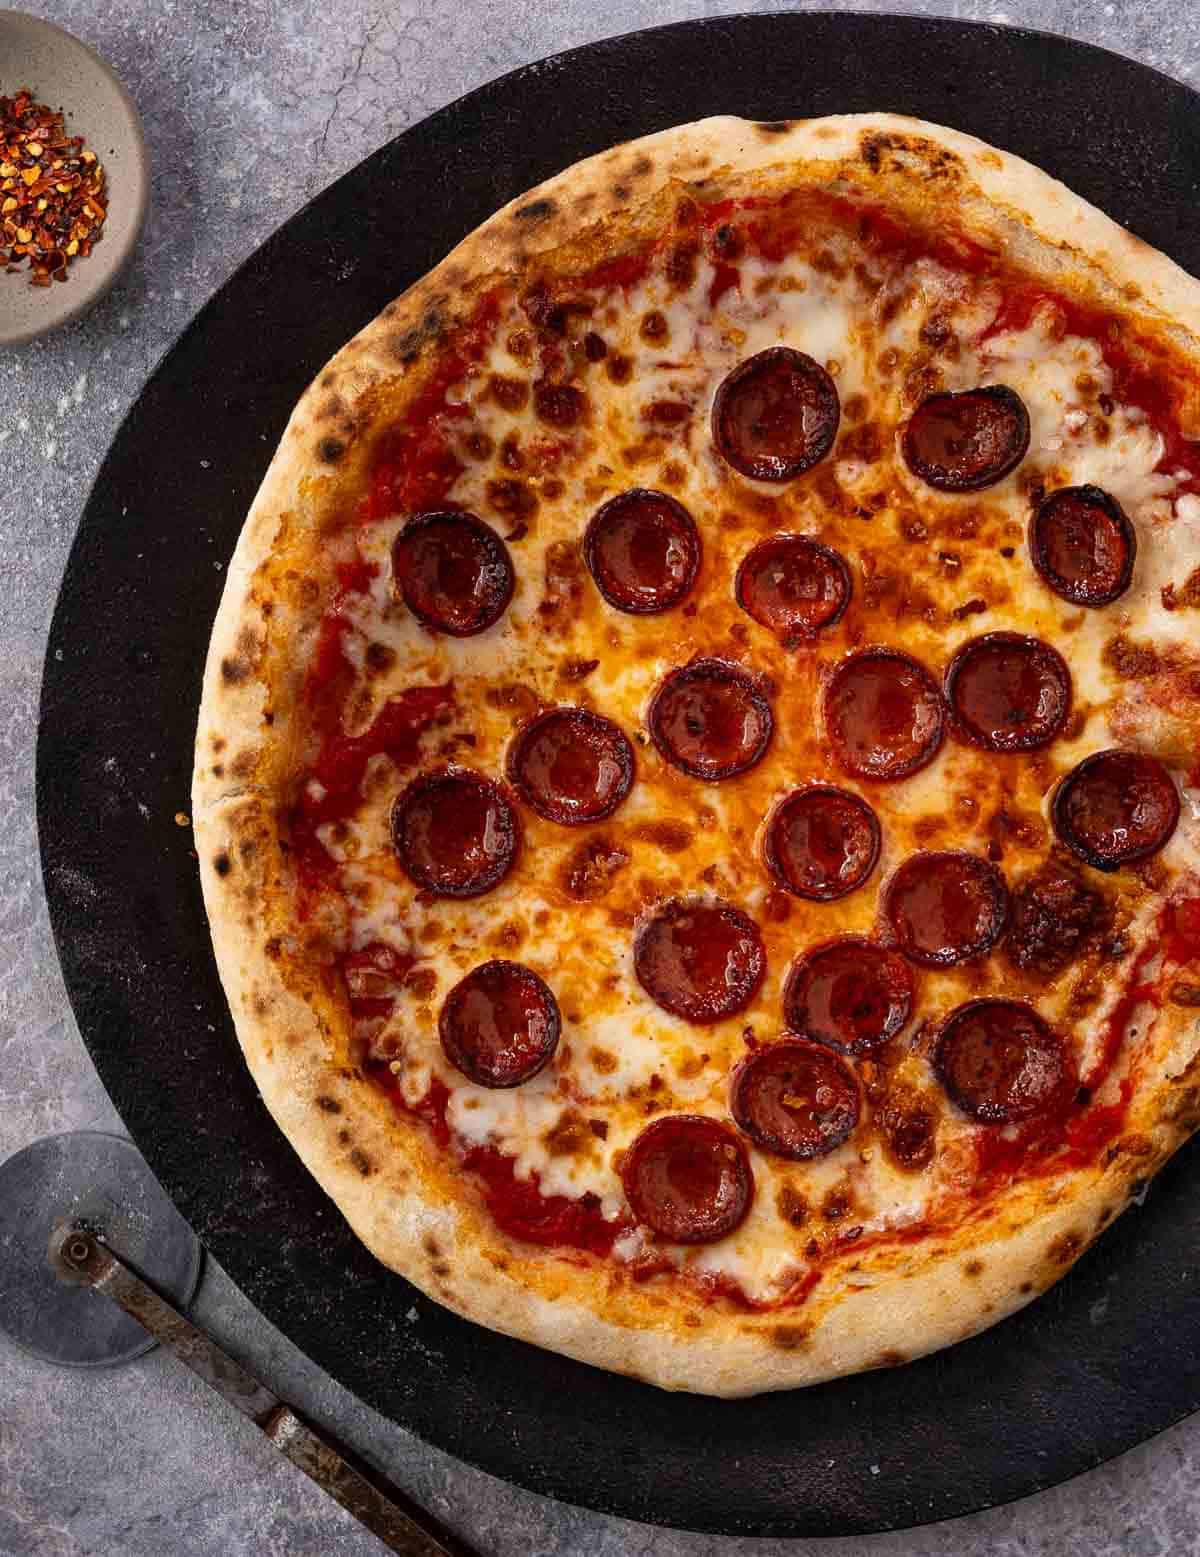 A pepperoni pizza made with a Sourdough Pizza Dough on a serving platter